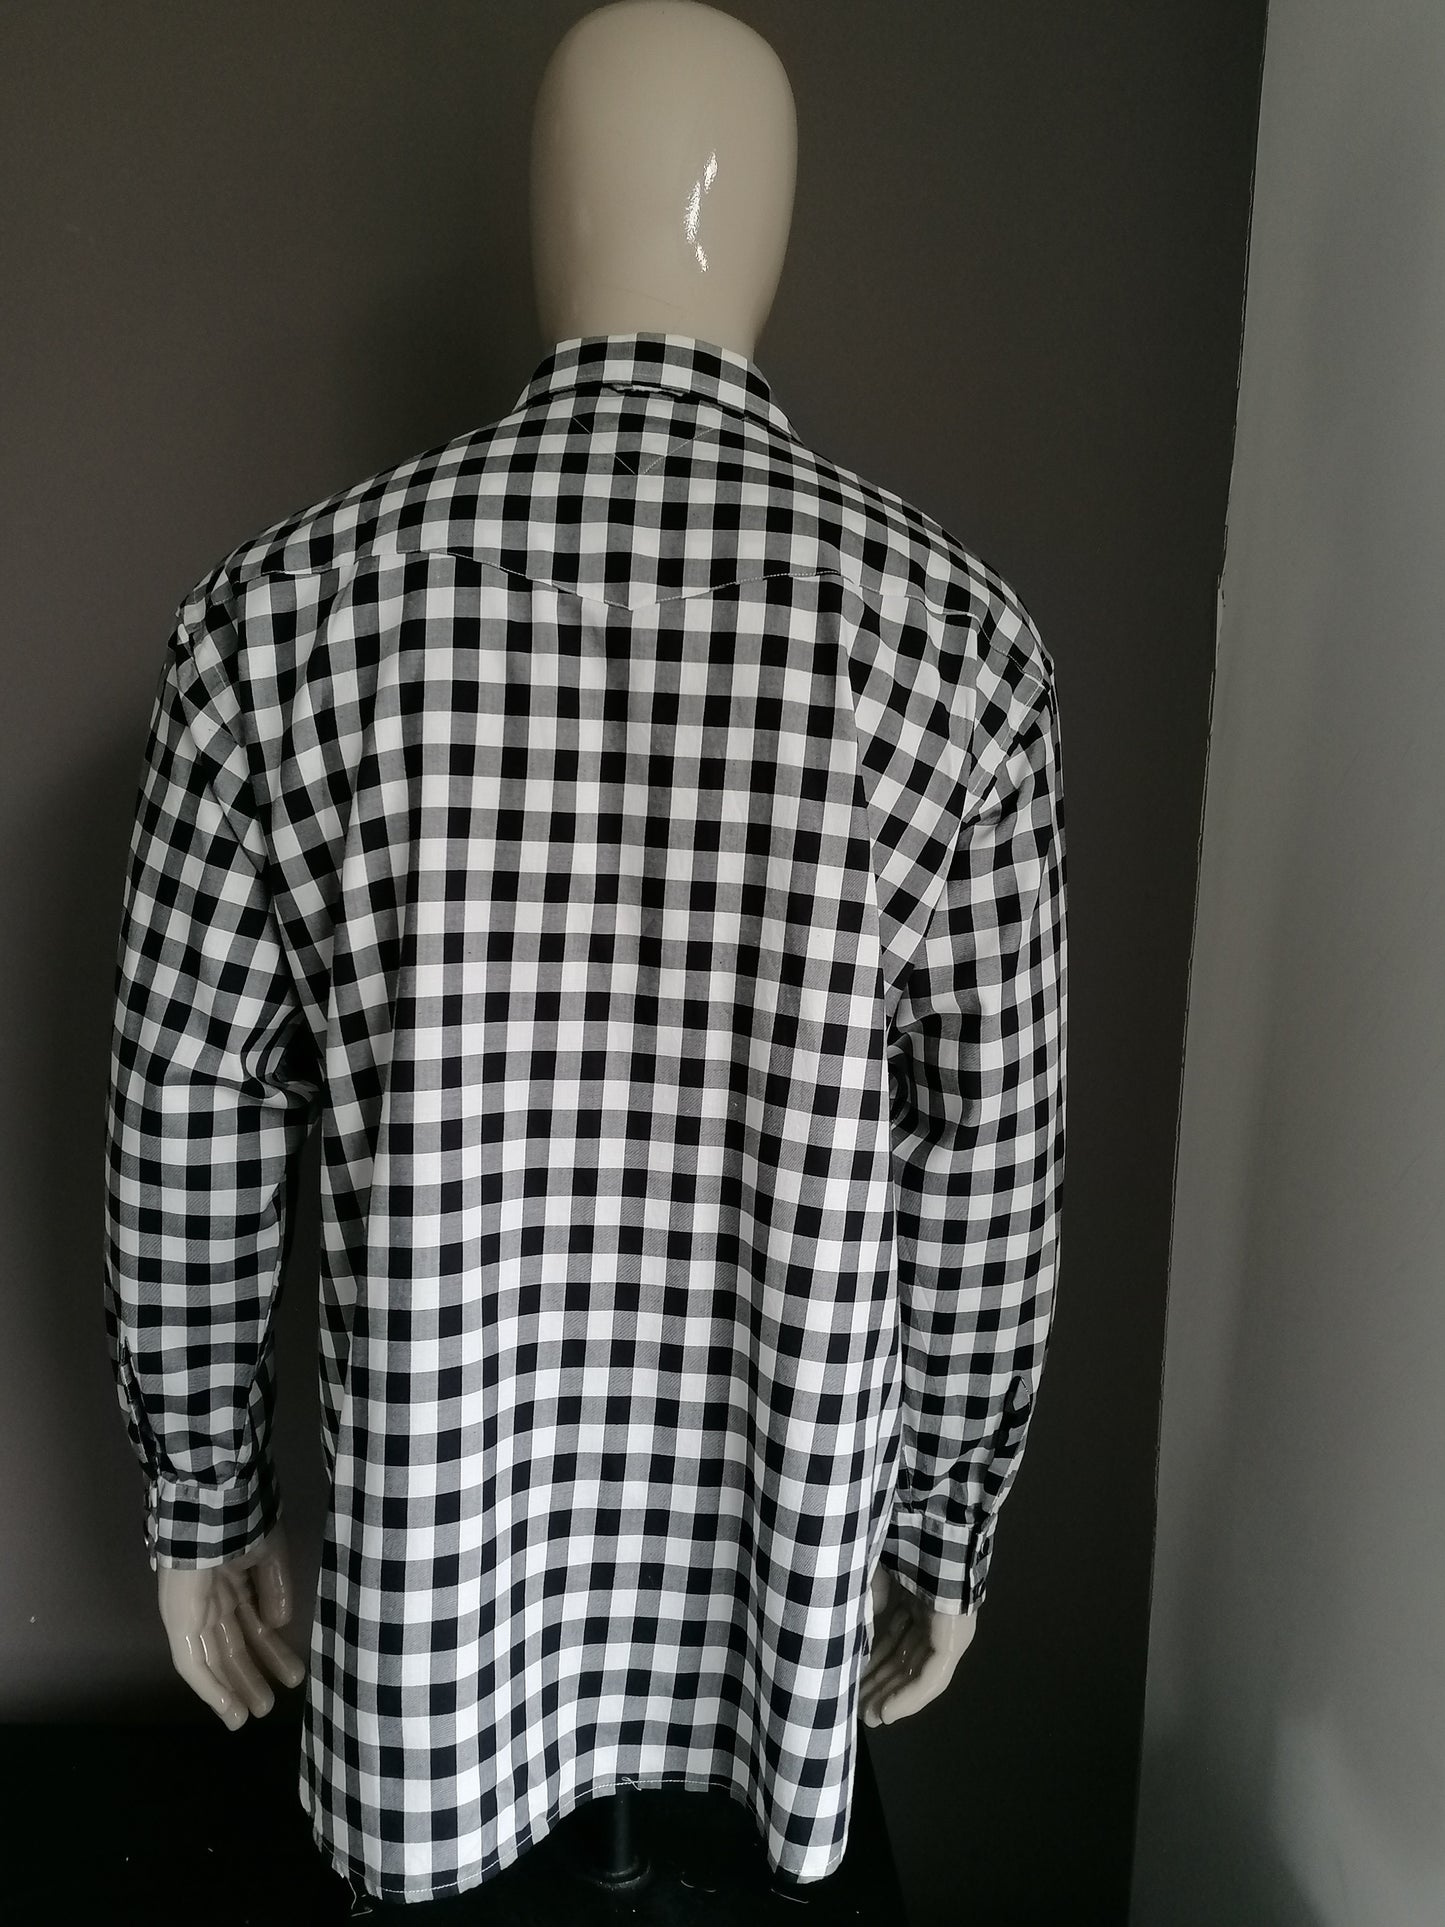 Tommy Hilfiger shirt with press studs. Black white checkered. Size XL.